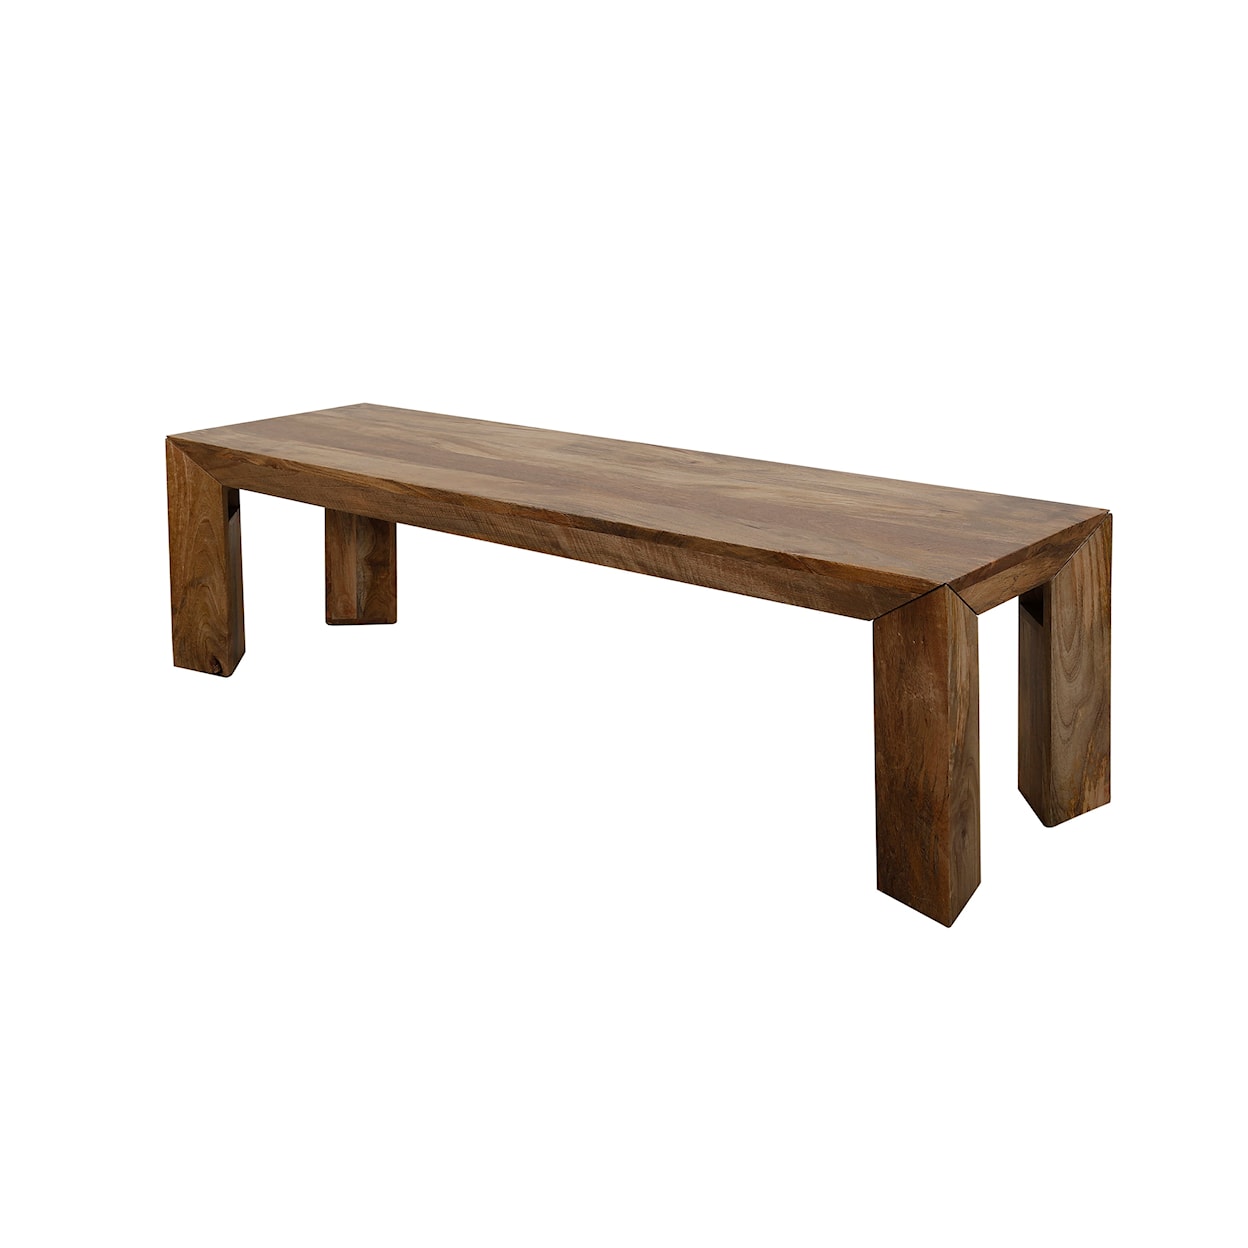 PH Crossings Downtown Dining Bench